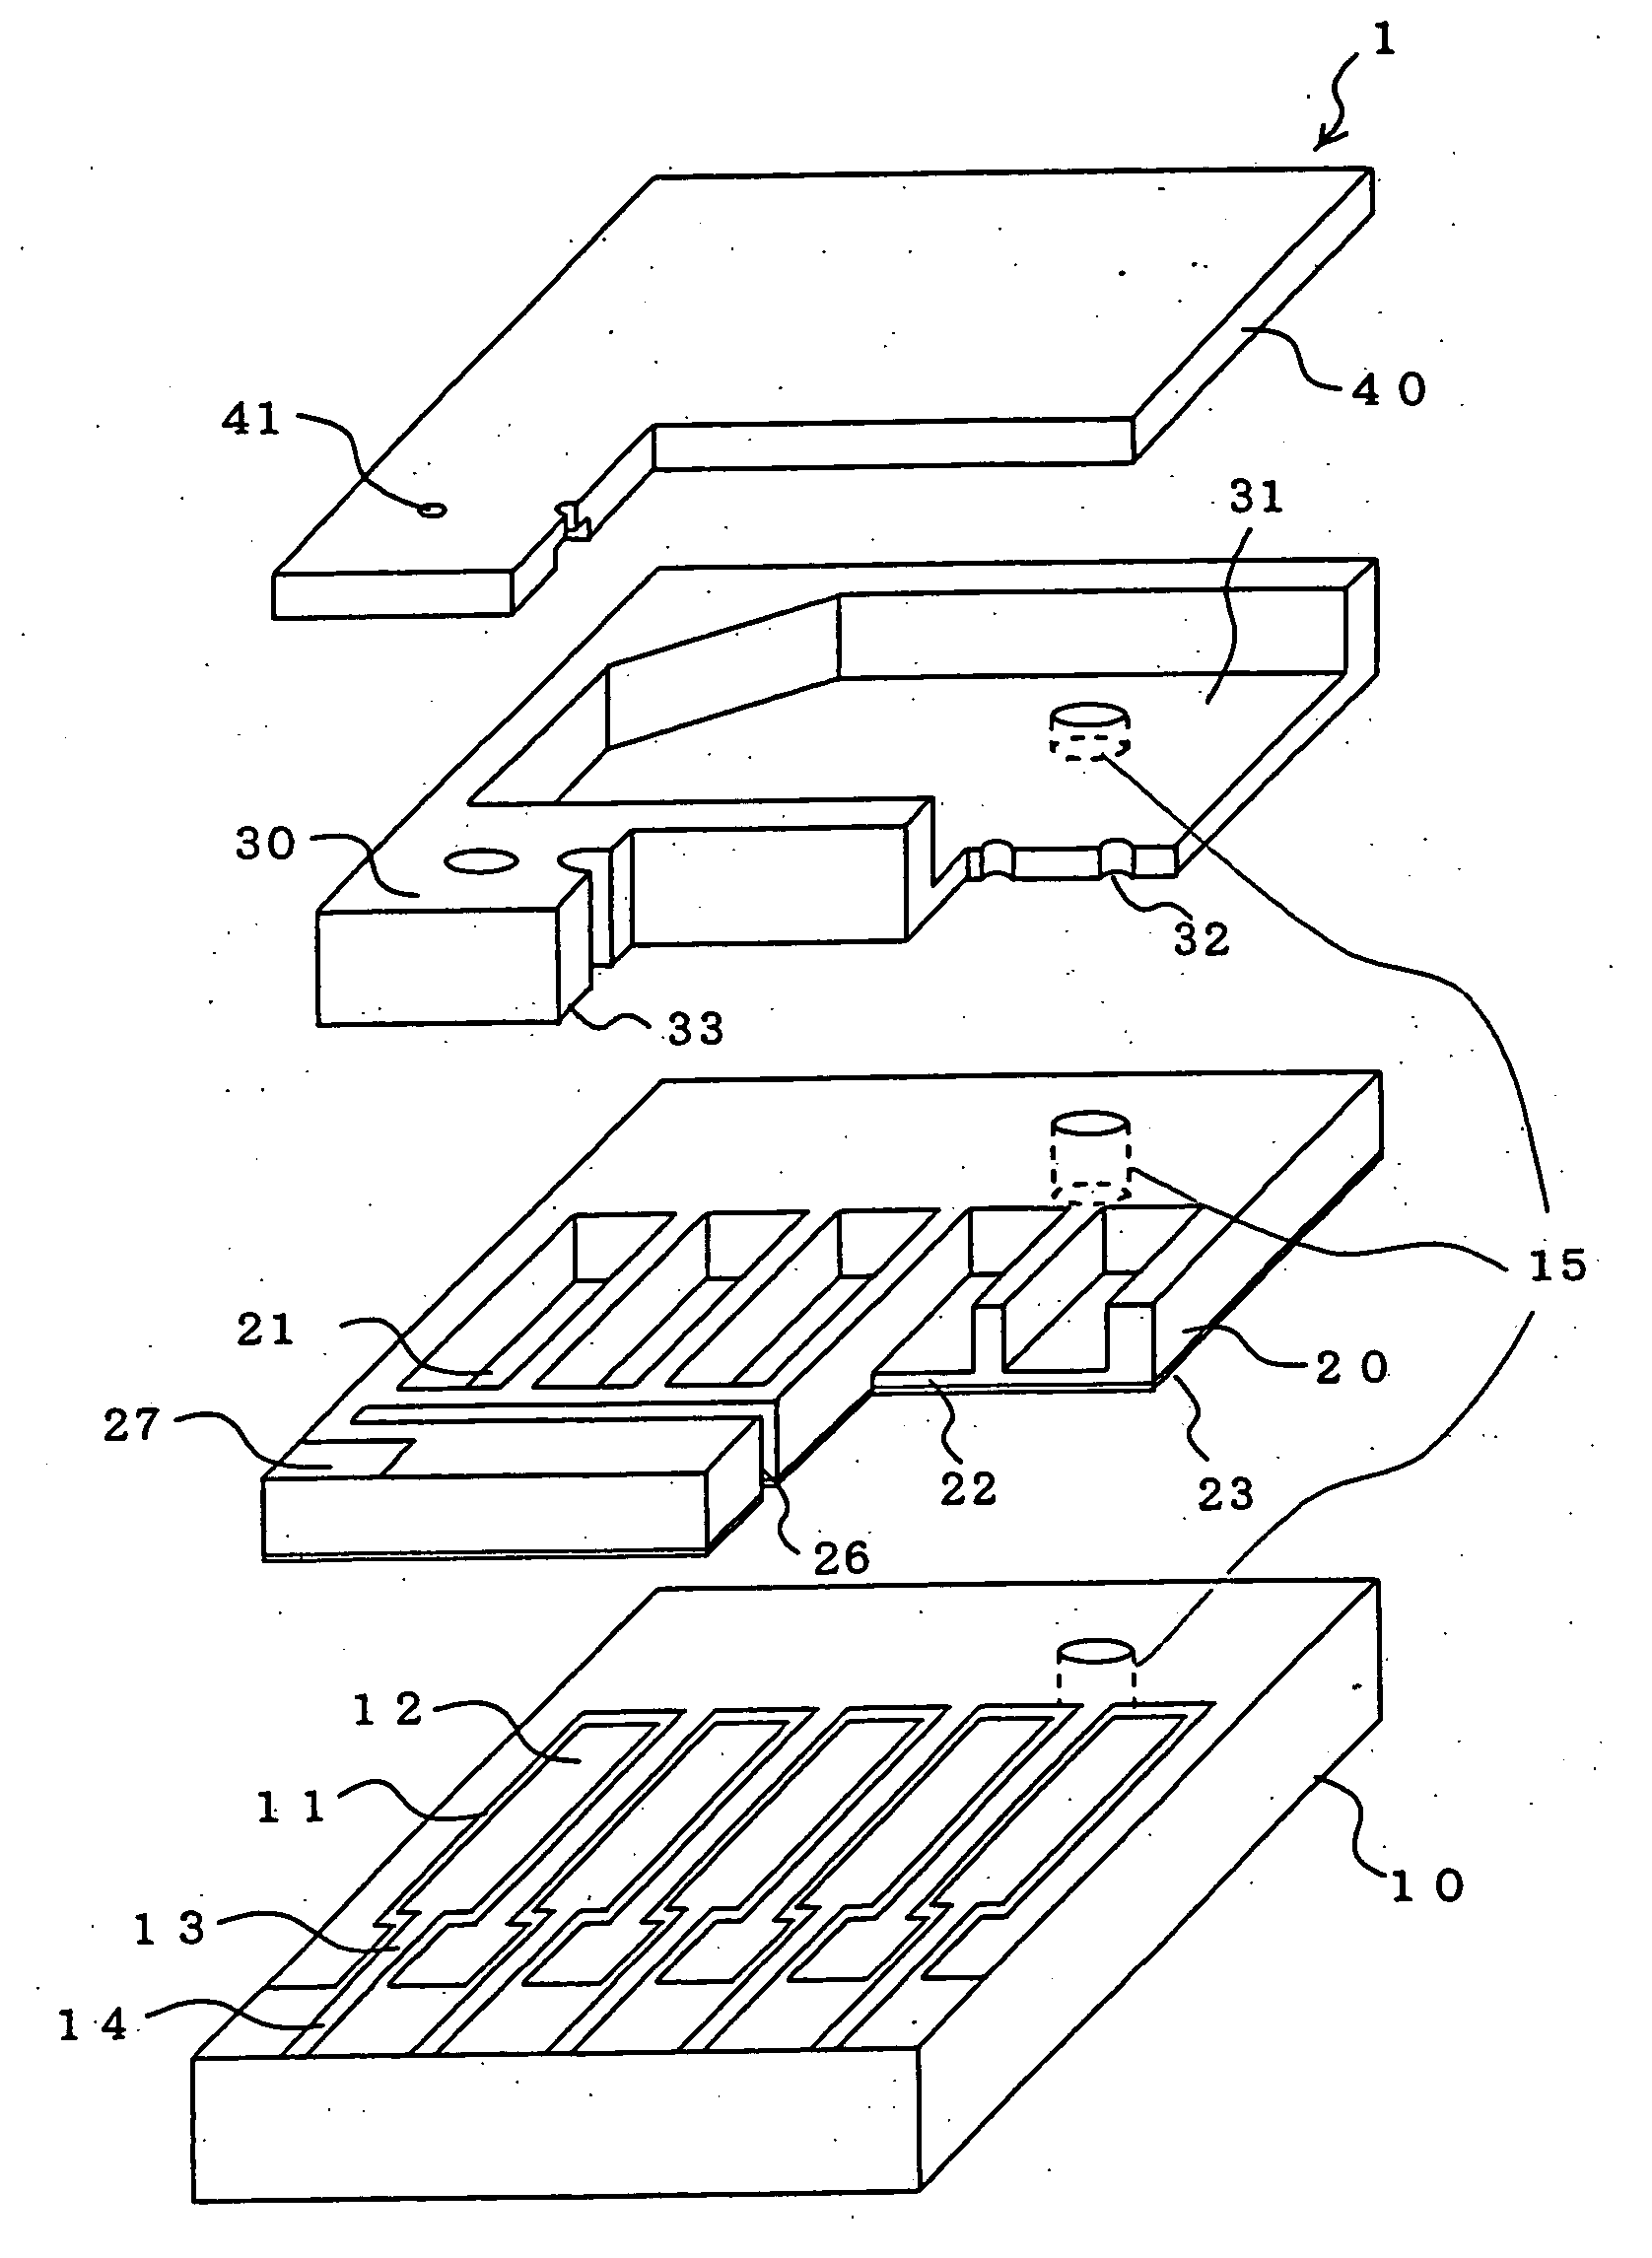 Electrostatic actuator, droplet discharging head, droplet discharging apparatus, electrostatic device, and method of manufacturing these